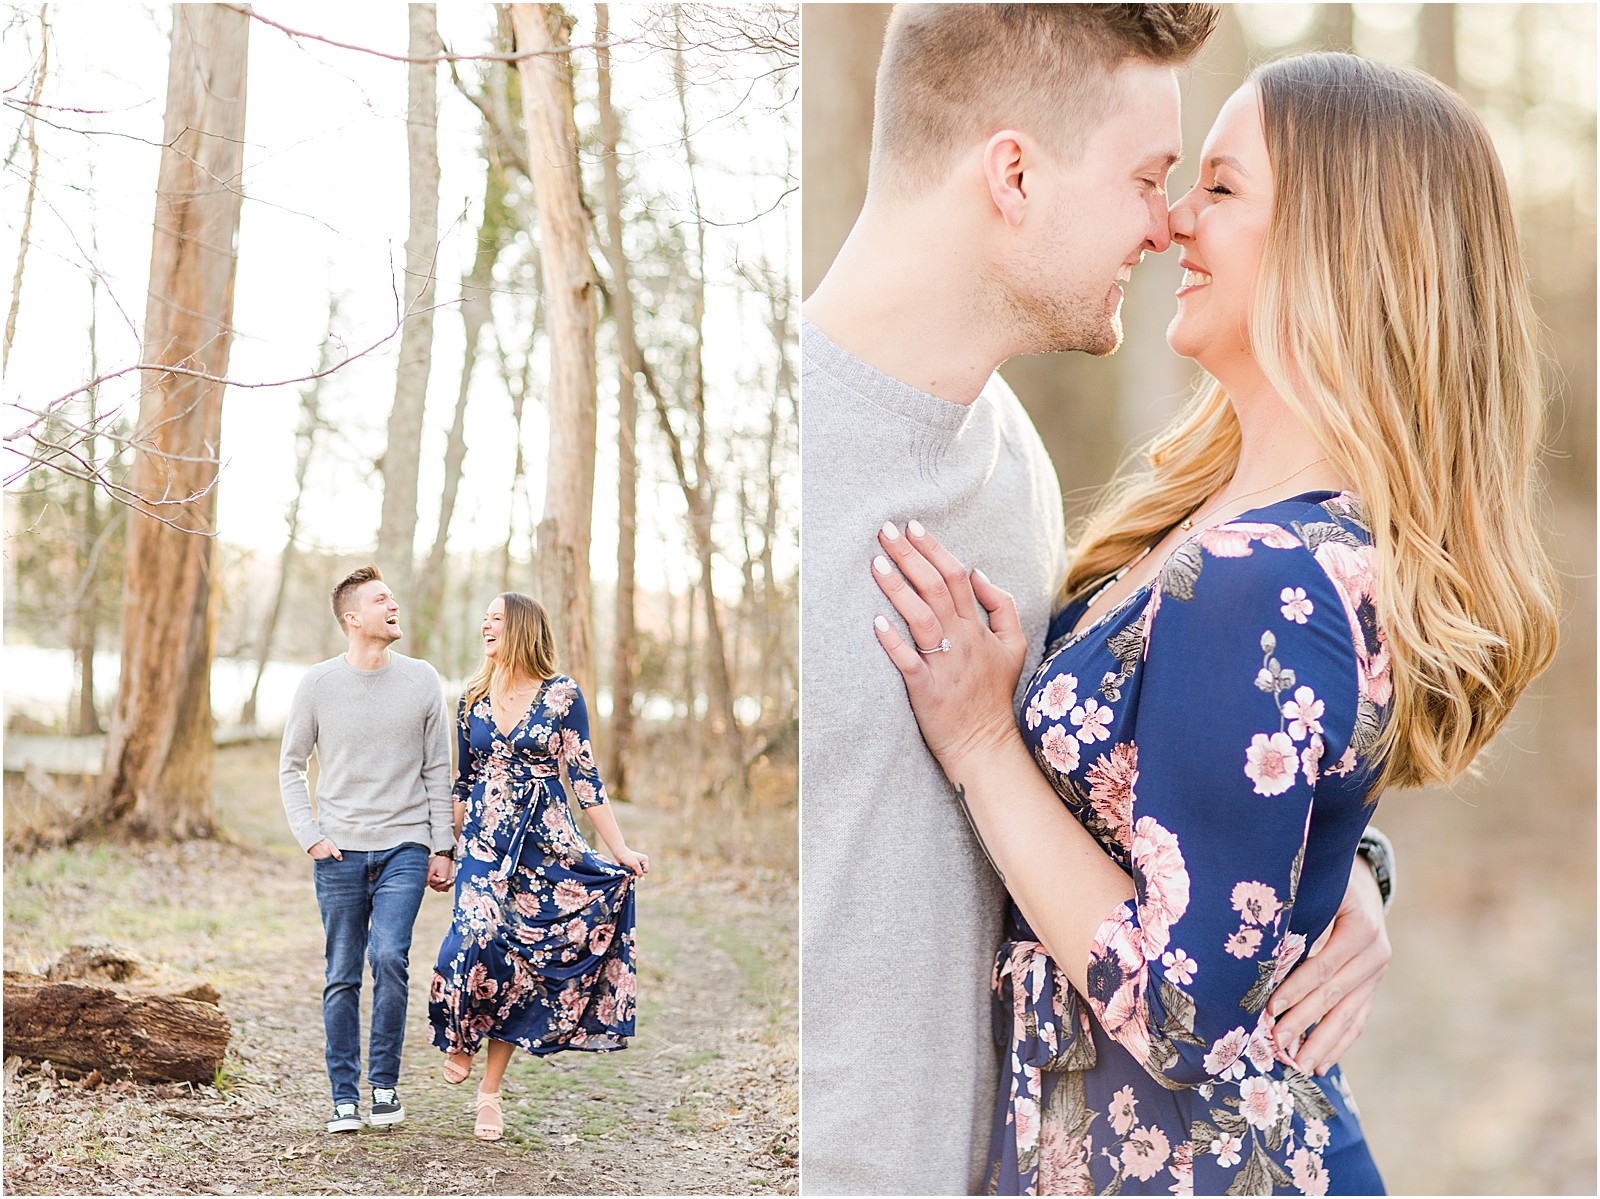 Rachel and Nick | Lincoln State Park Engagement Session 018.jpg